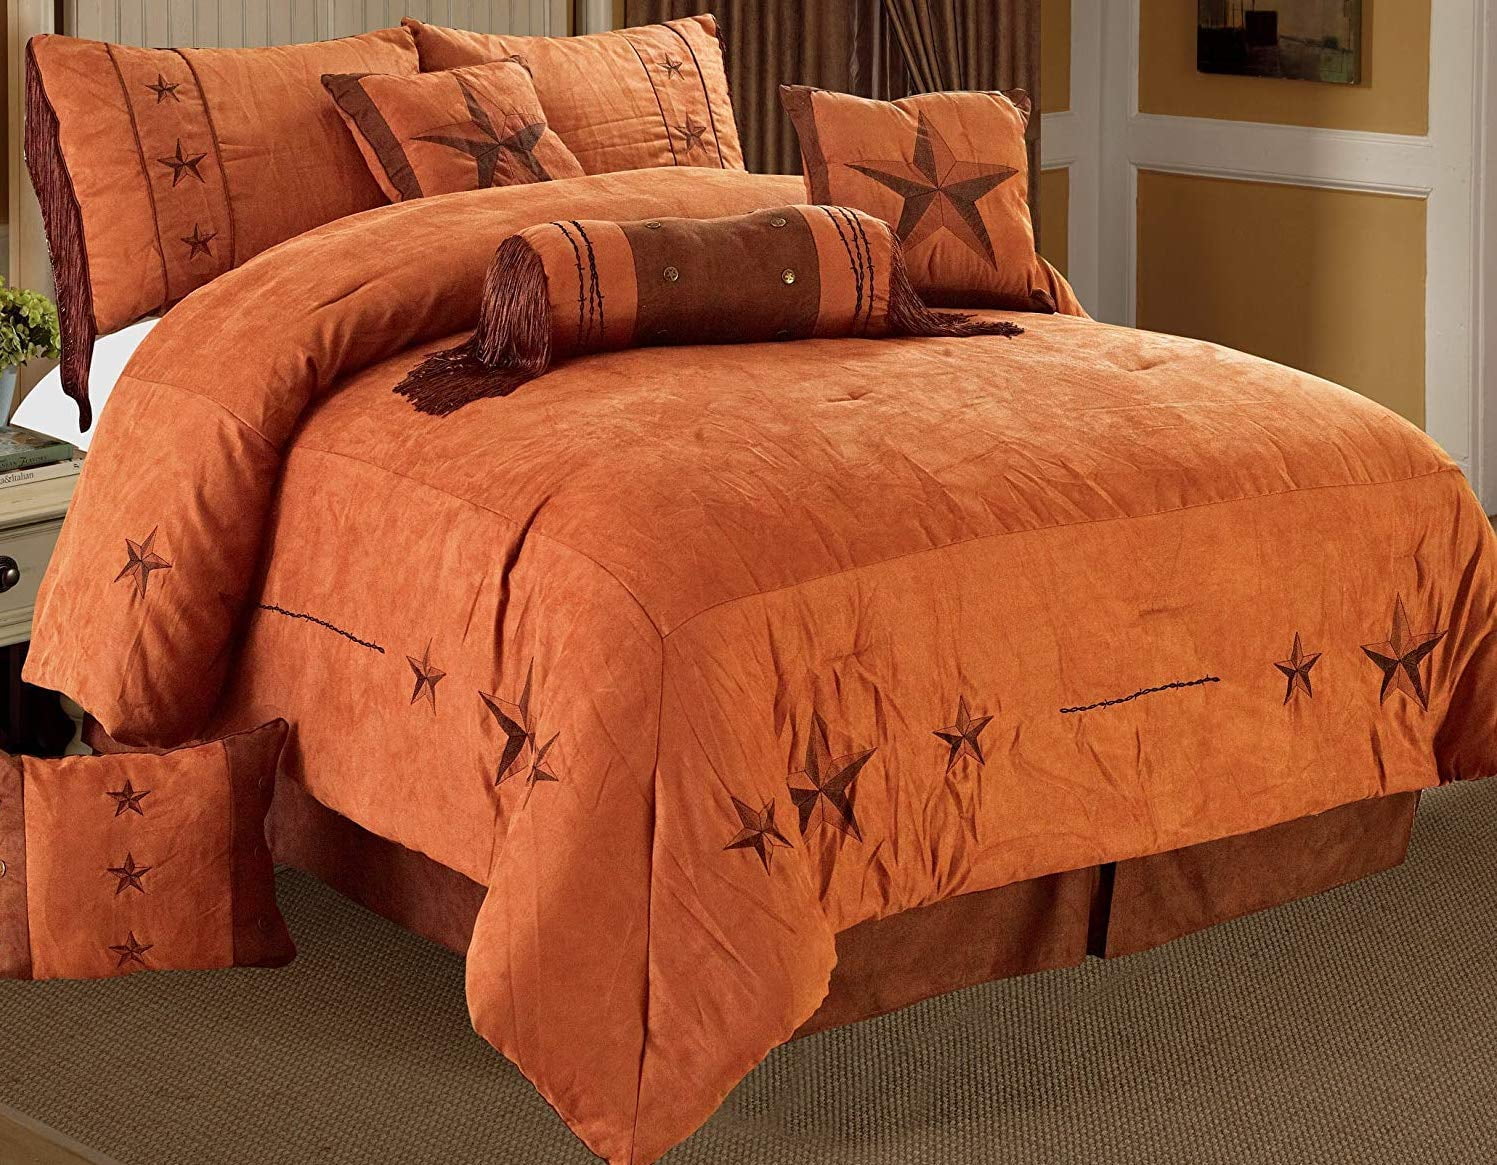 7 Pieces Set Embroidery Printed Texas Star Western Star Luxury Comforter Suede 